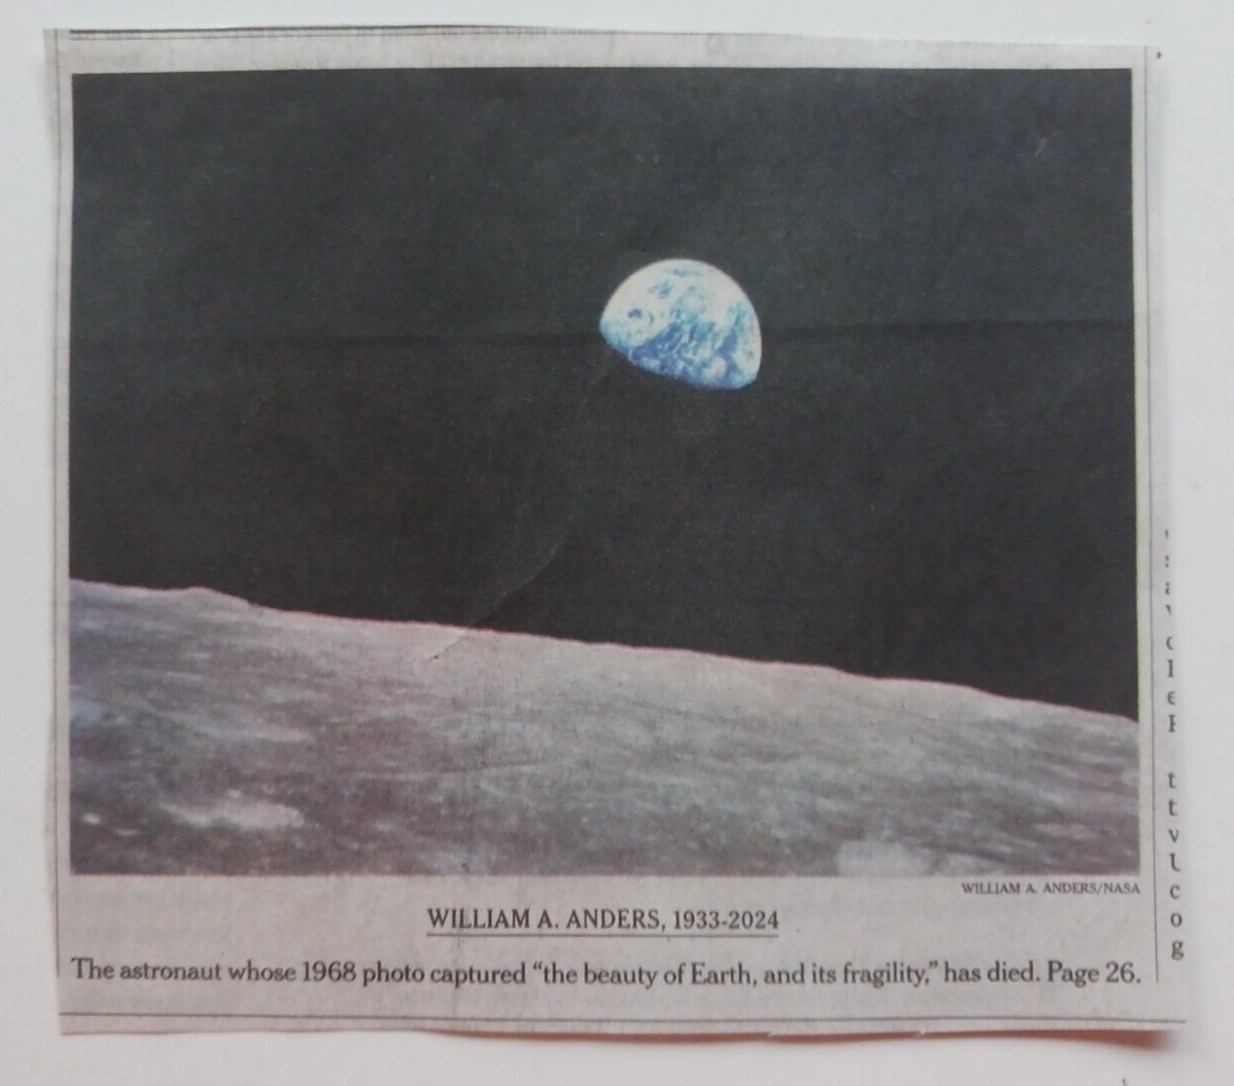 William A. Anders 90  Obituary New York Times Astronaut Apollo 8